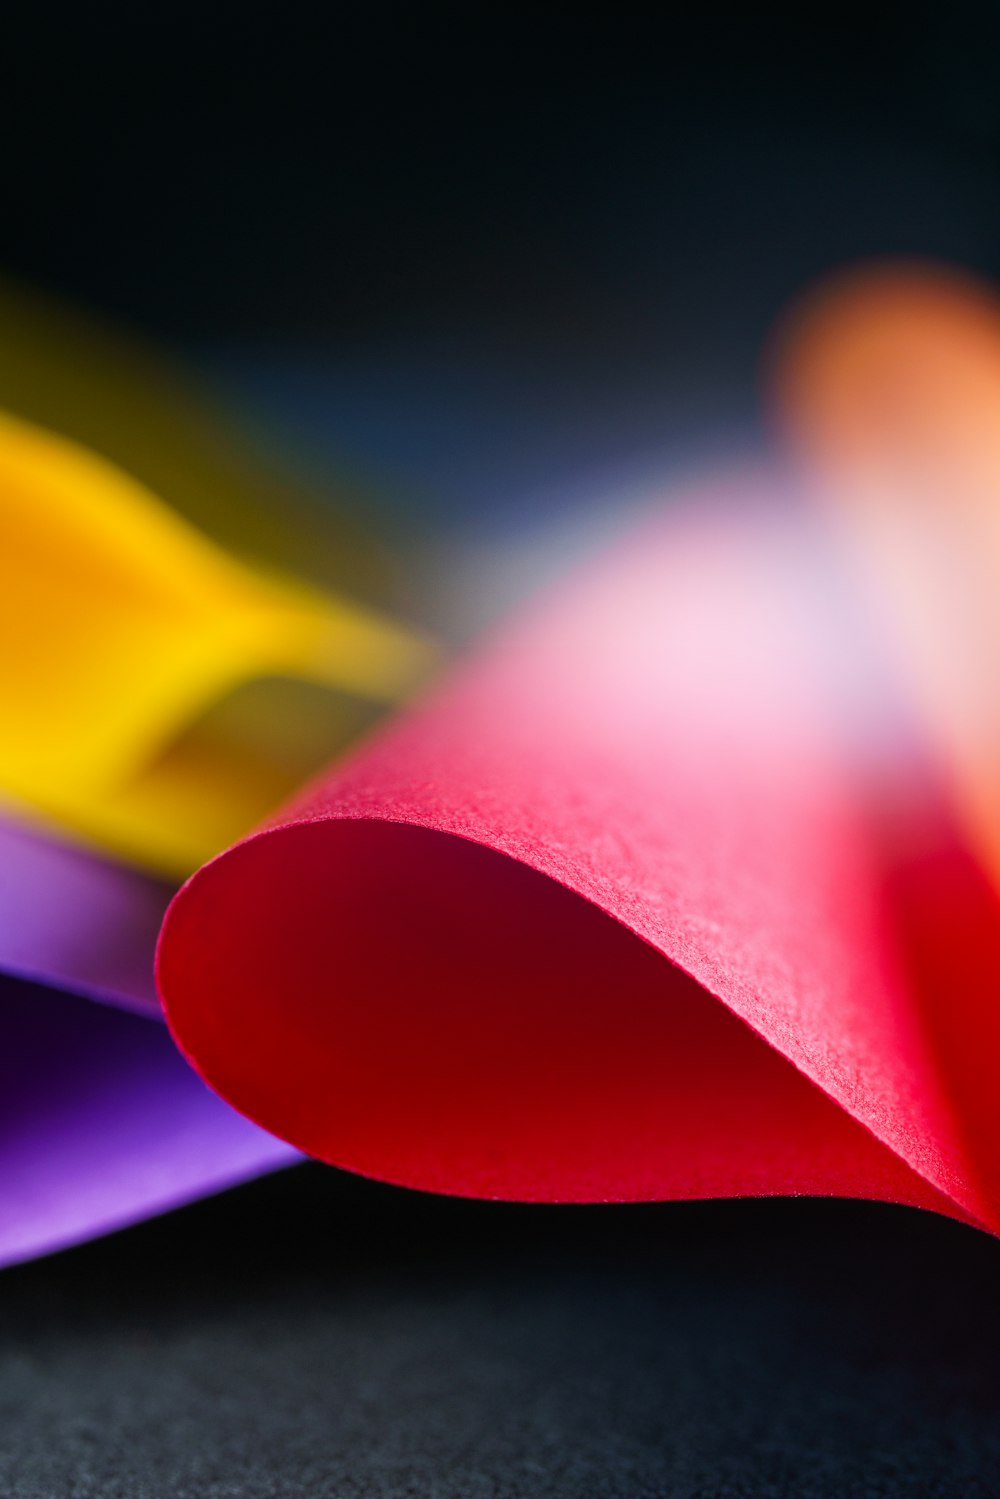 a close up of a colorful object on a table